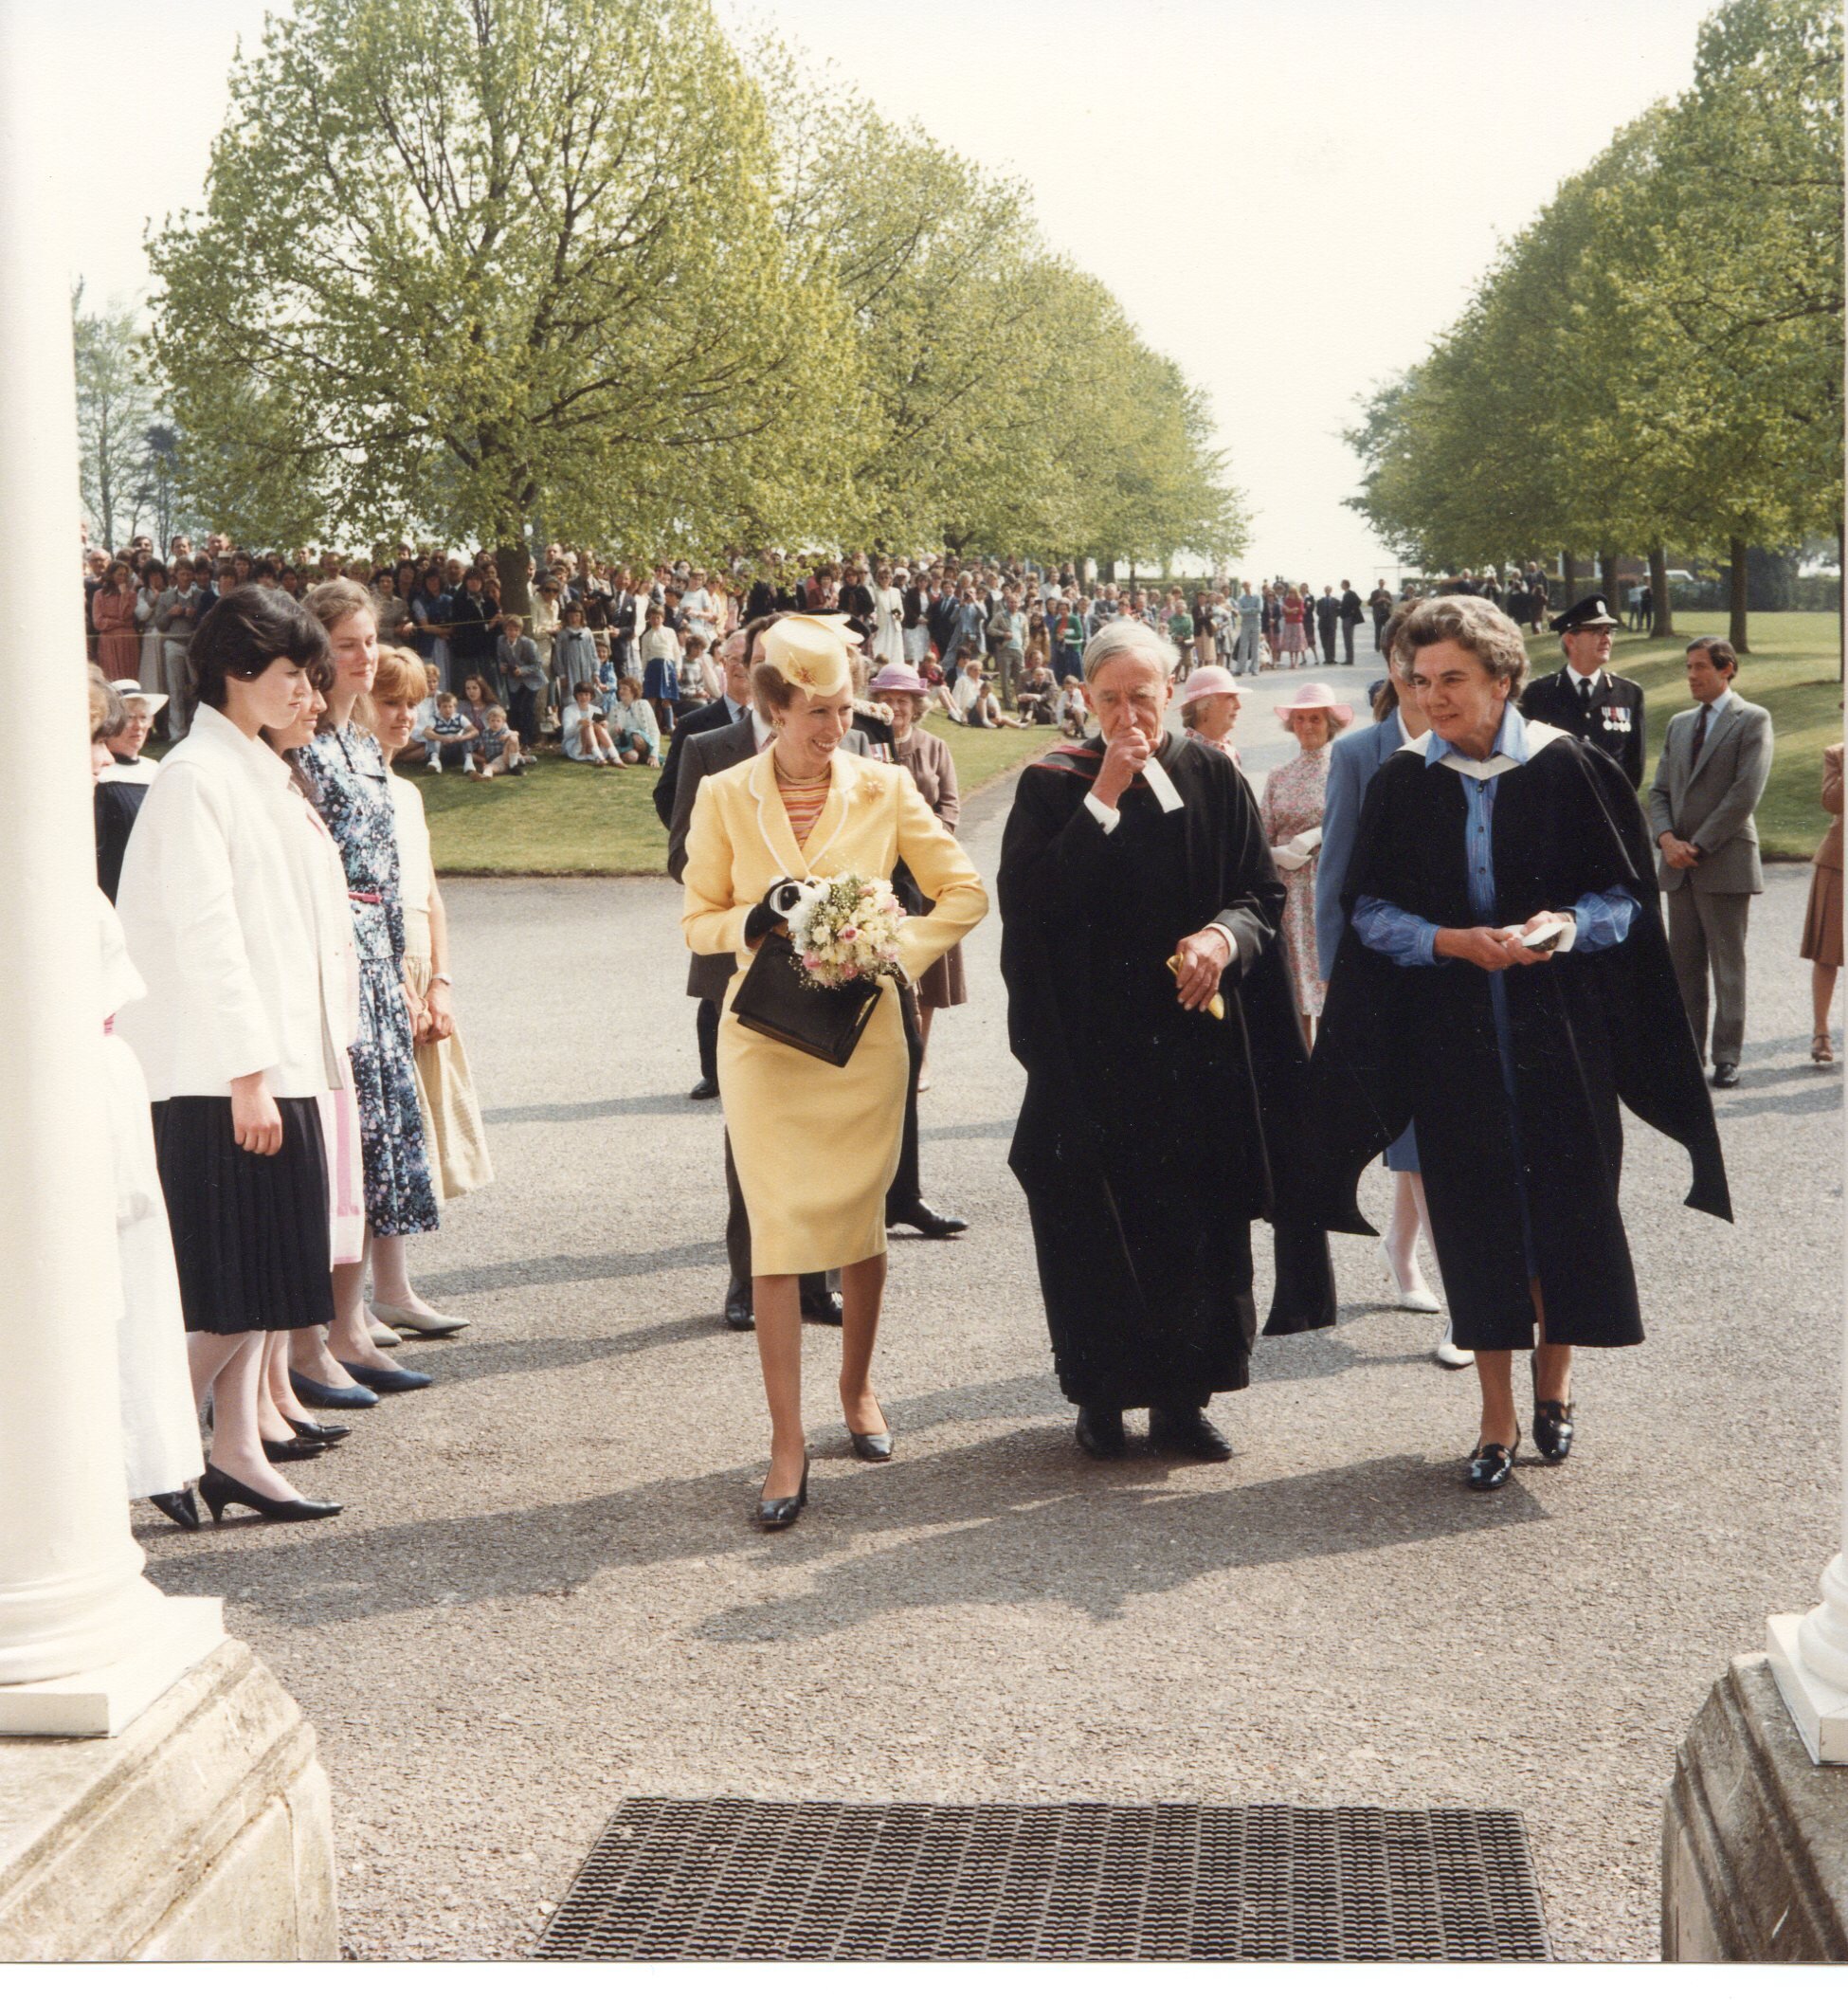  Princess Anne visiting the school’s centenary in 1984 